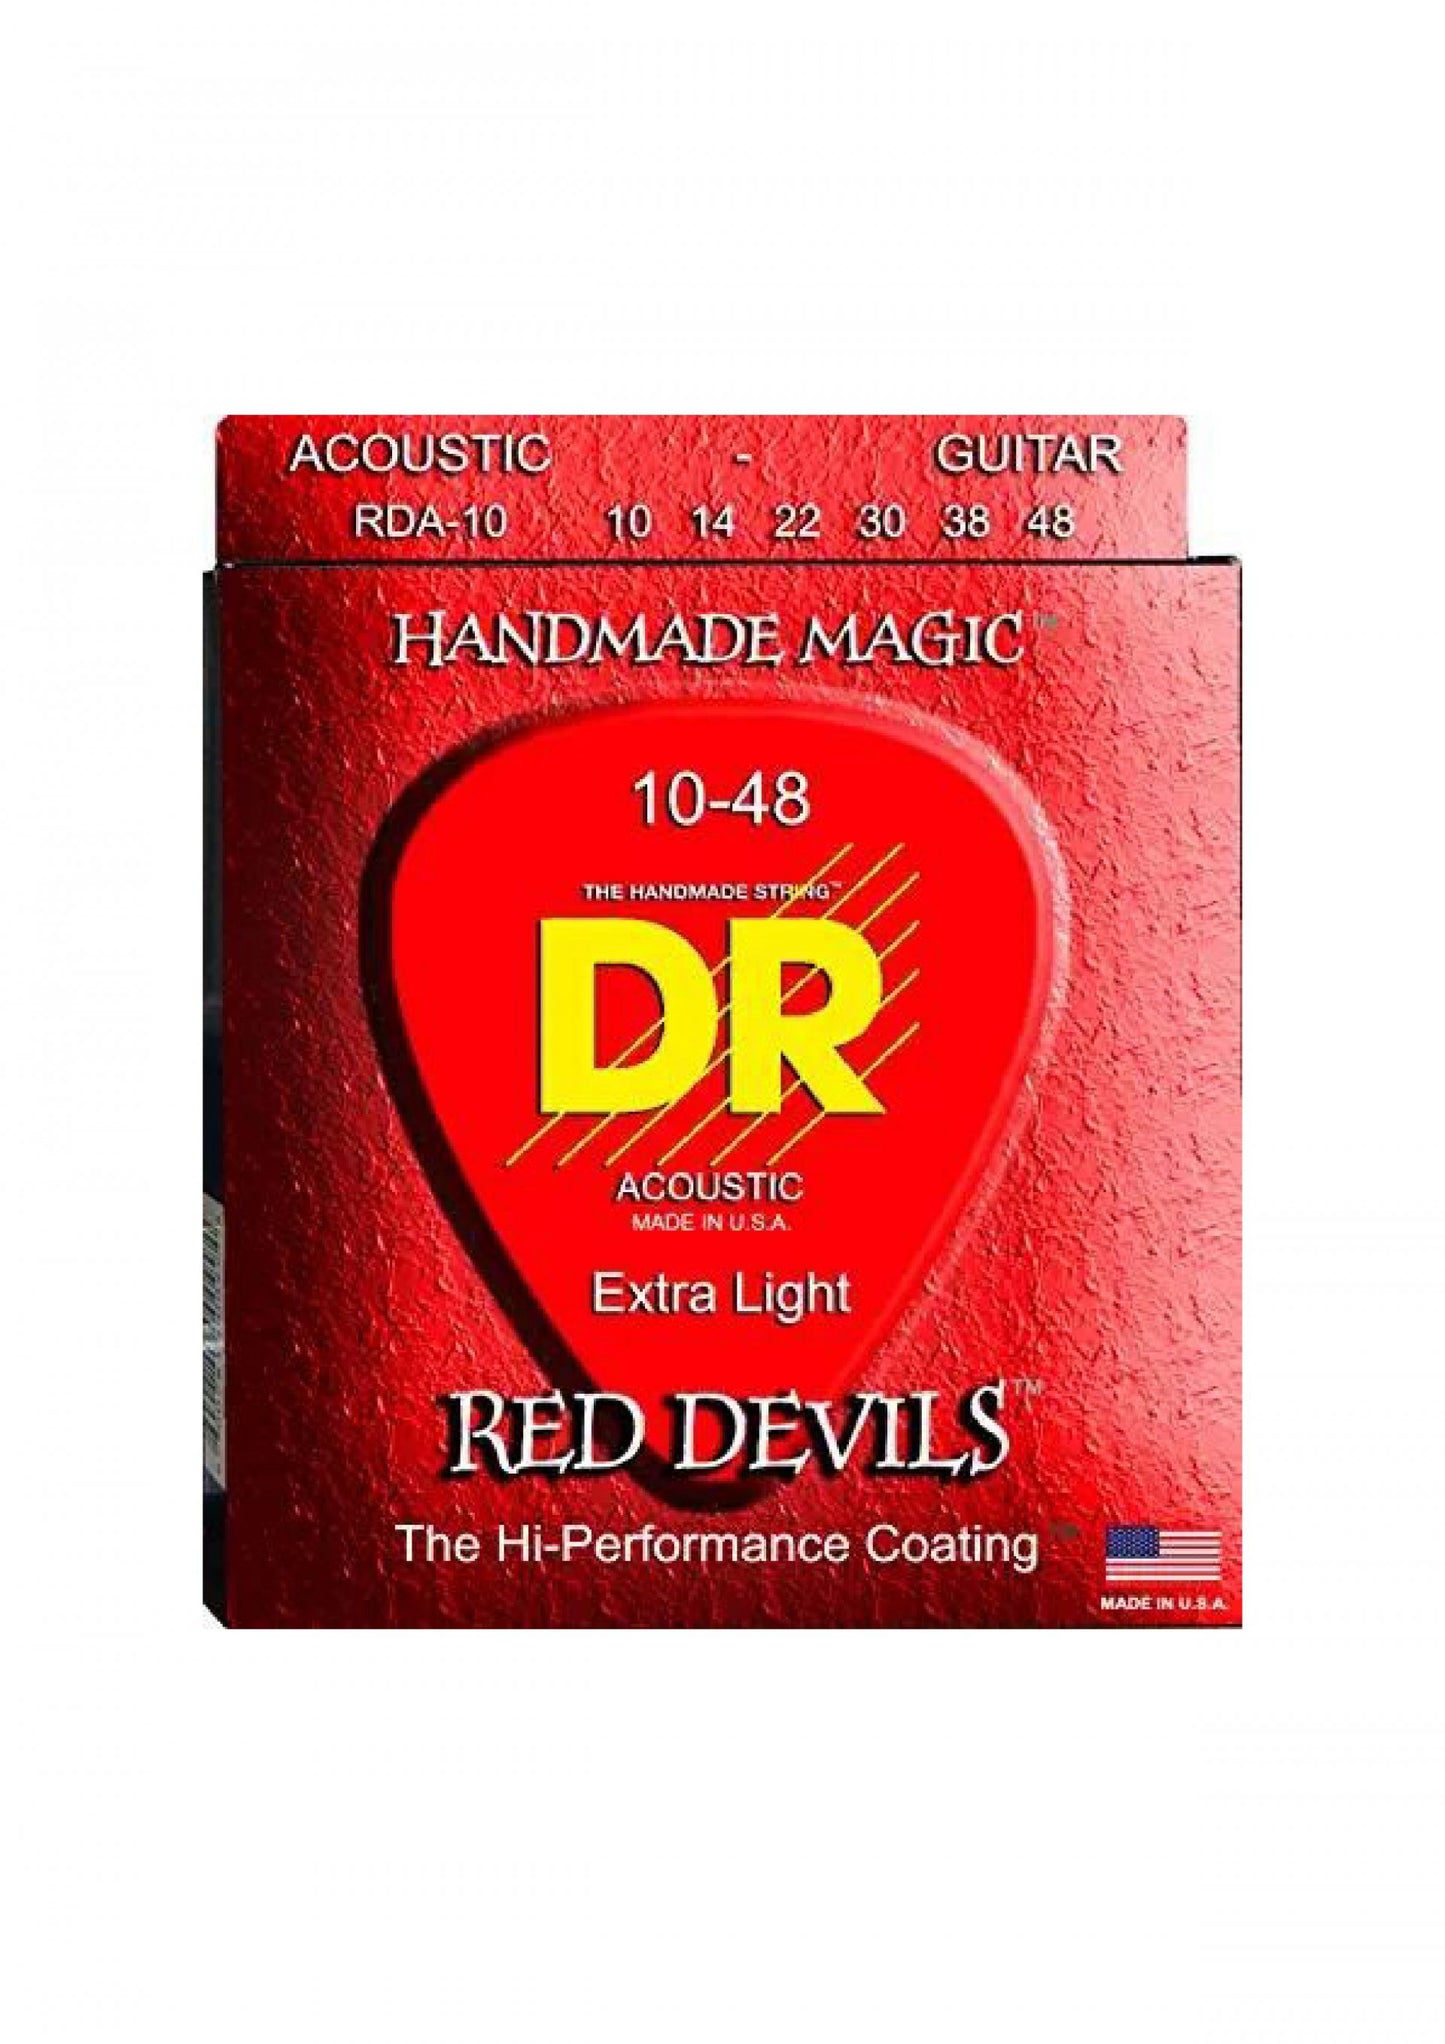 DR Strings RDA-10 RED DEVILS RED Colored Acoustic Guitar Strings 10-48 Extra Light